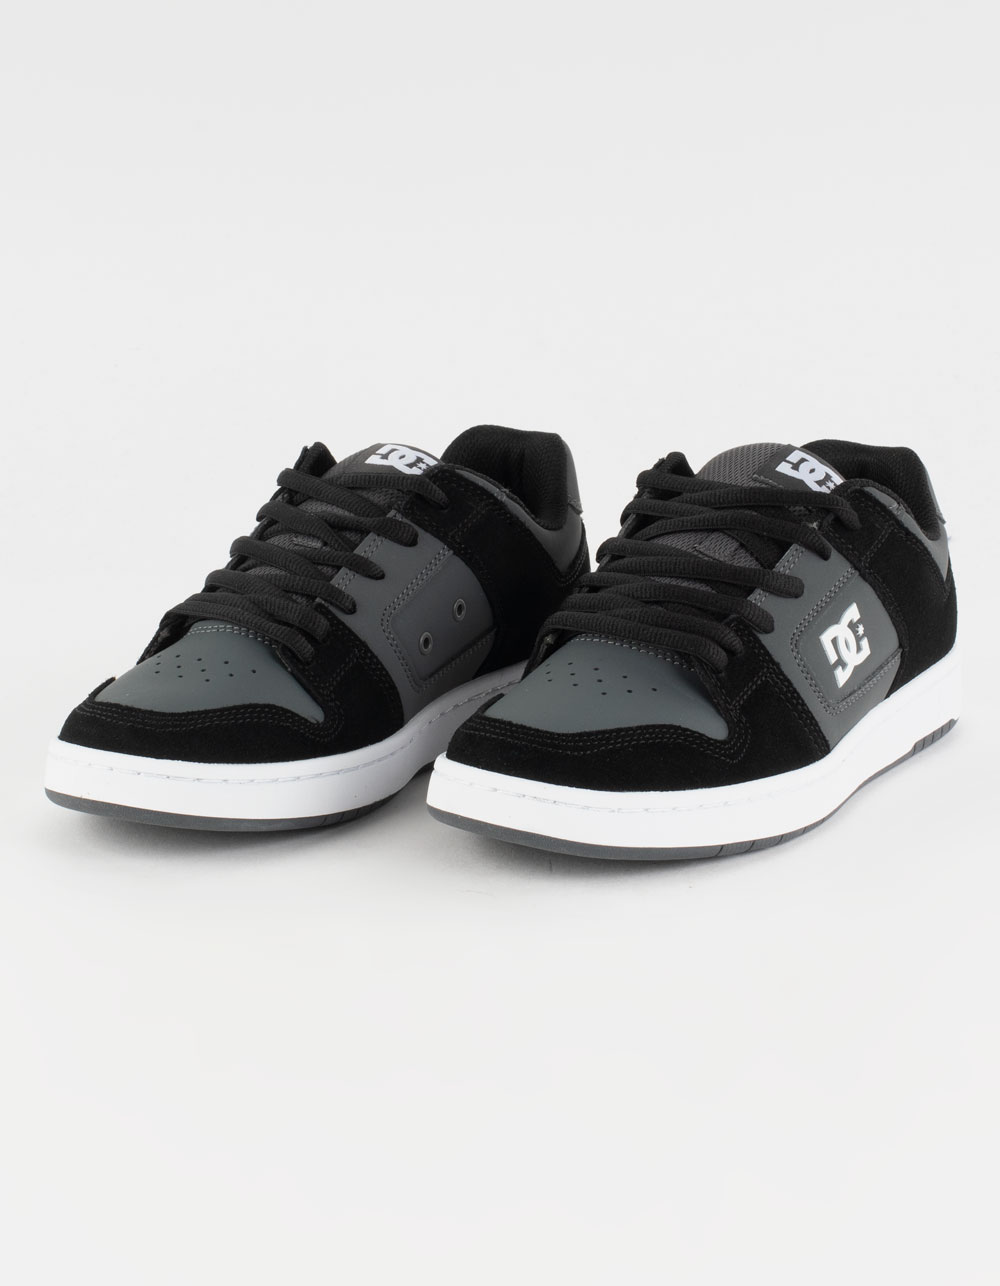 basin Bacteria the first DC SHOES Manteca 4 Mens Shoes - BLK/GRY | Tillys